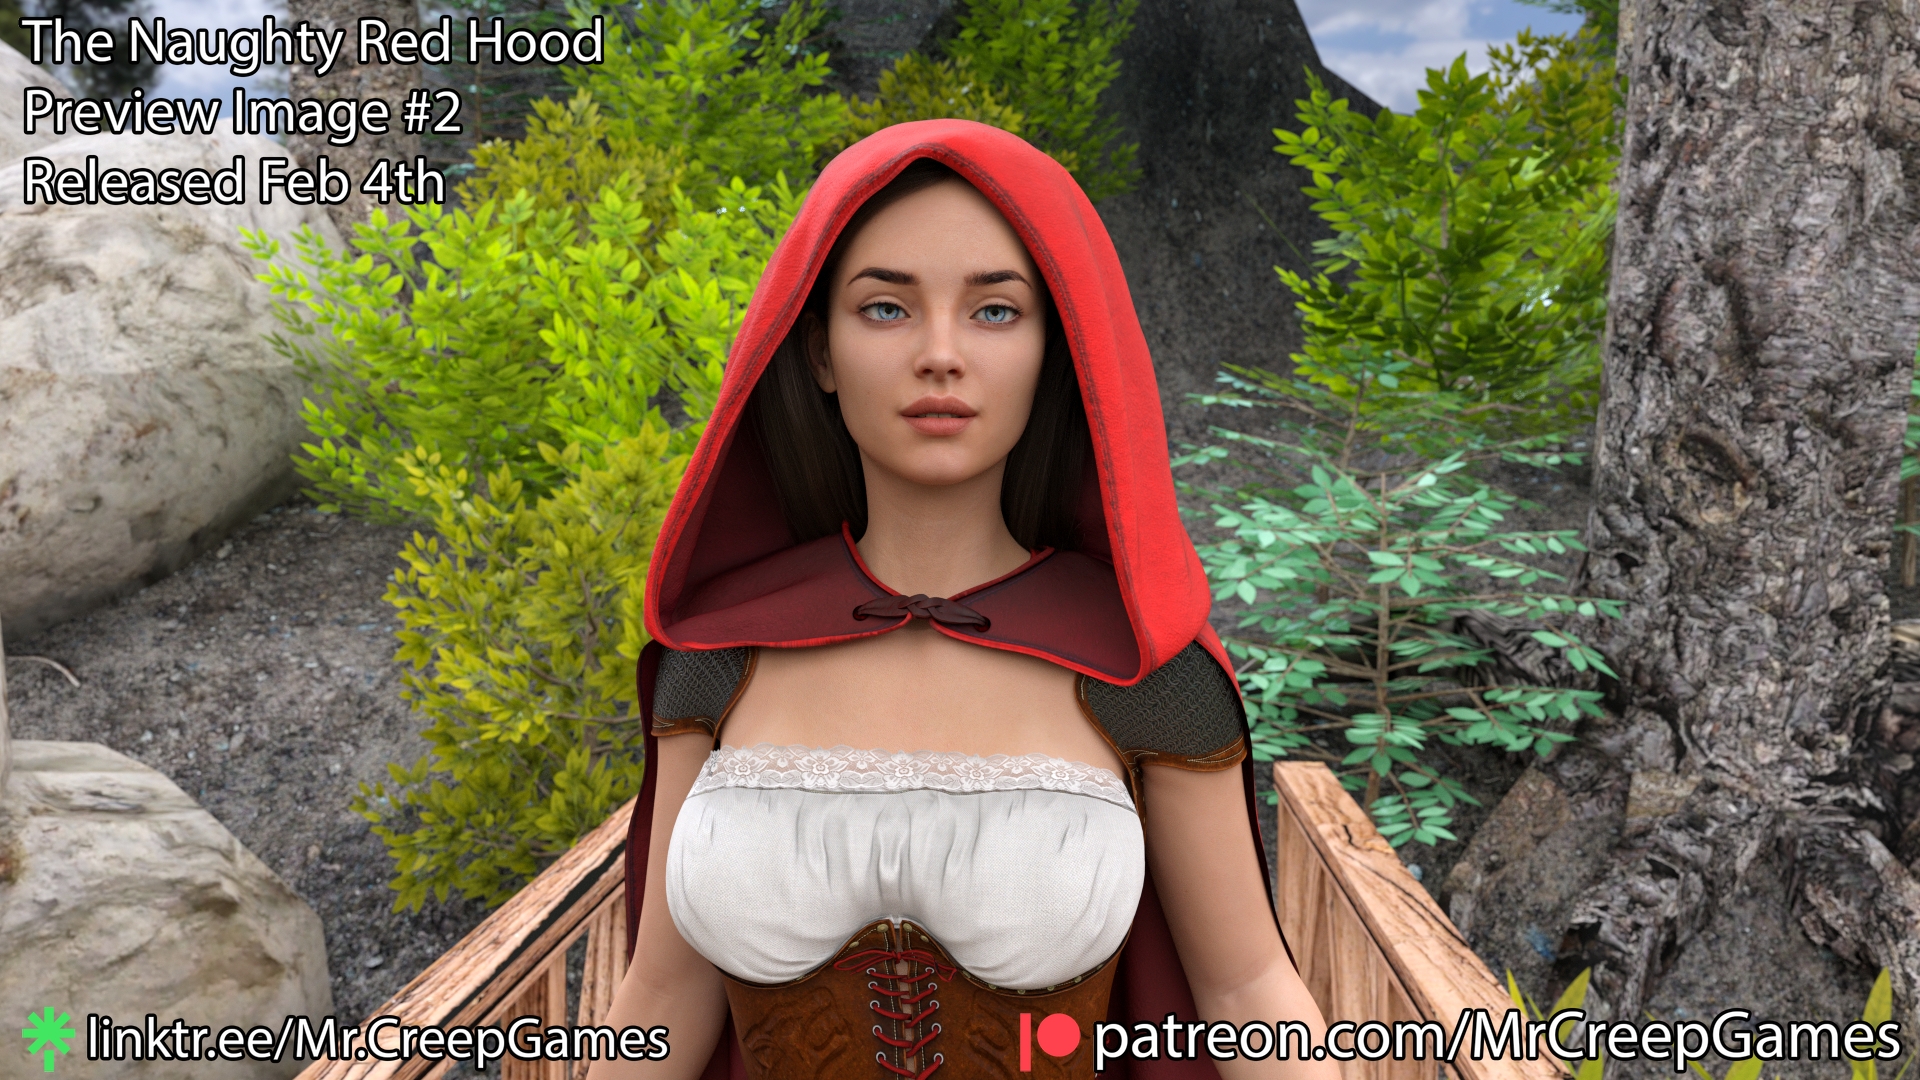 The Naughty Red Hood Preview #2  3d Porn 3d Girl Nsfw 3dnsfw Sexy Hot Nude Big boobs Pinup Pose Cute Teen